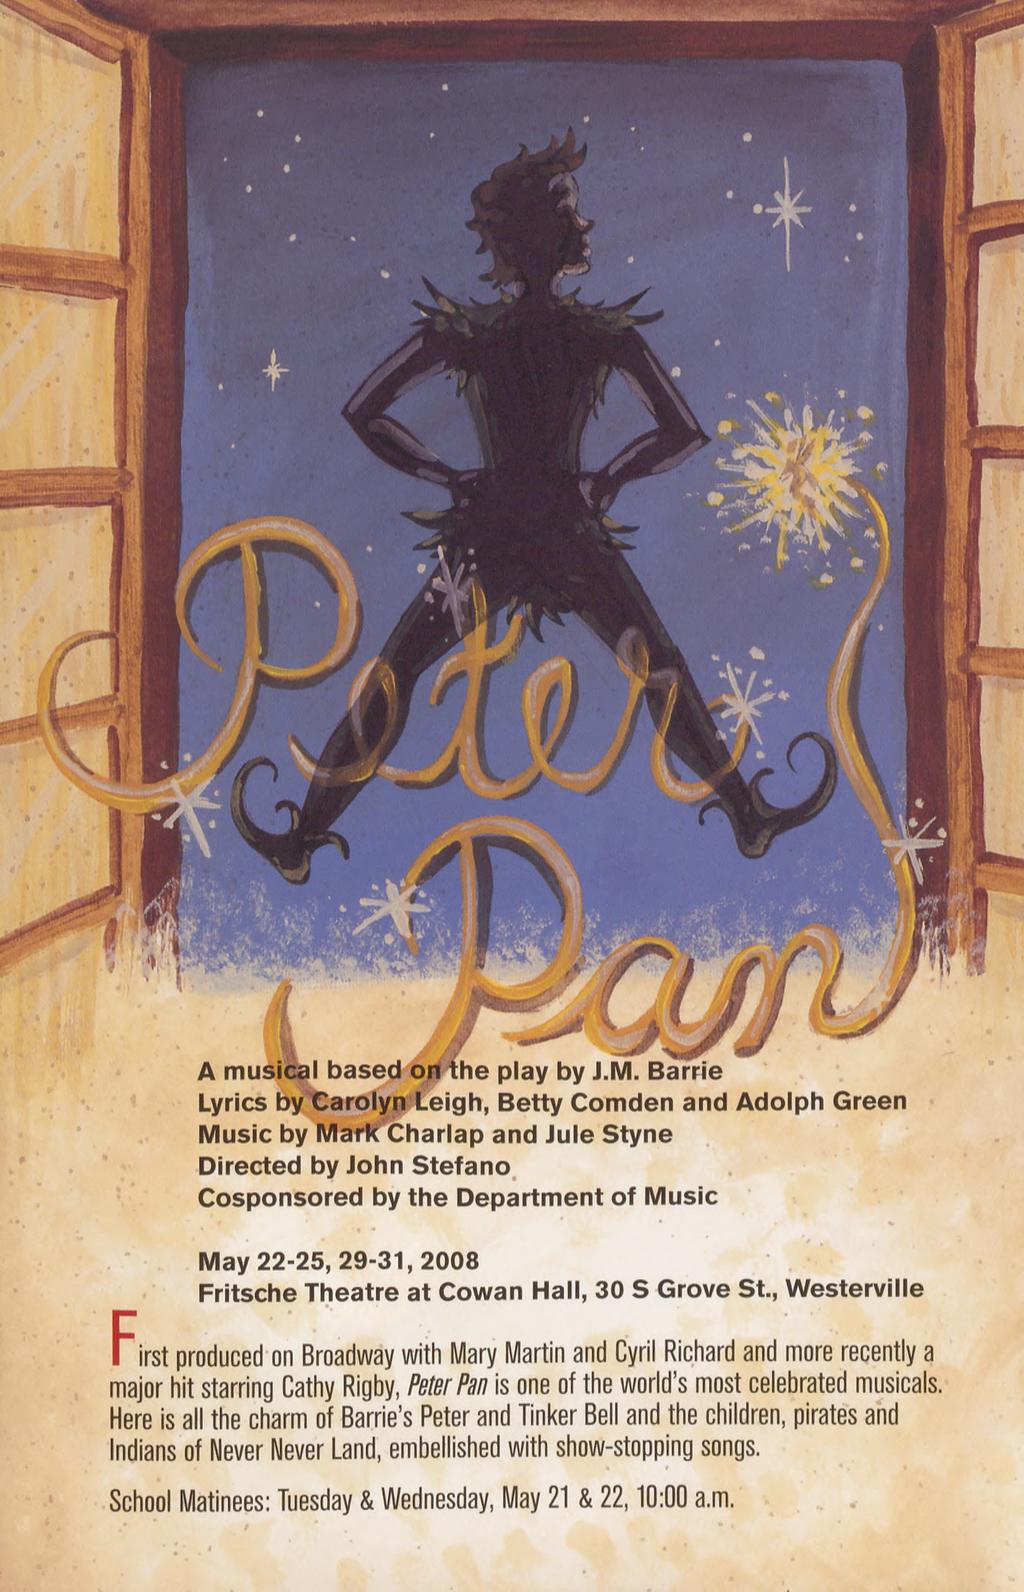 Lyrics by IDaroiyn Leigh, Betty Comden and Adolph Green Music by Mark Charlap and Jule Styne Directed by John Stefano I Cosponsored by the Department of Music May 22-25, 29-31,2008 Fritsche Theatre